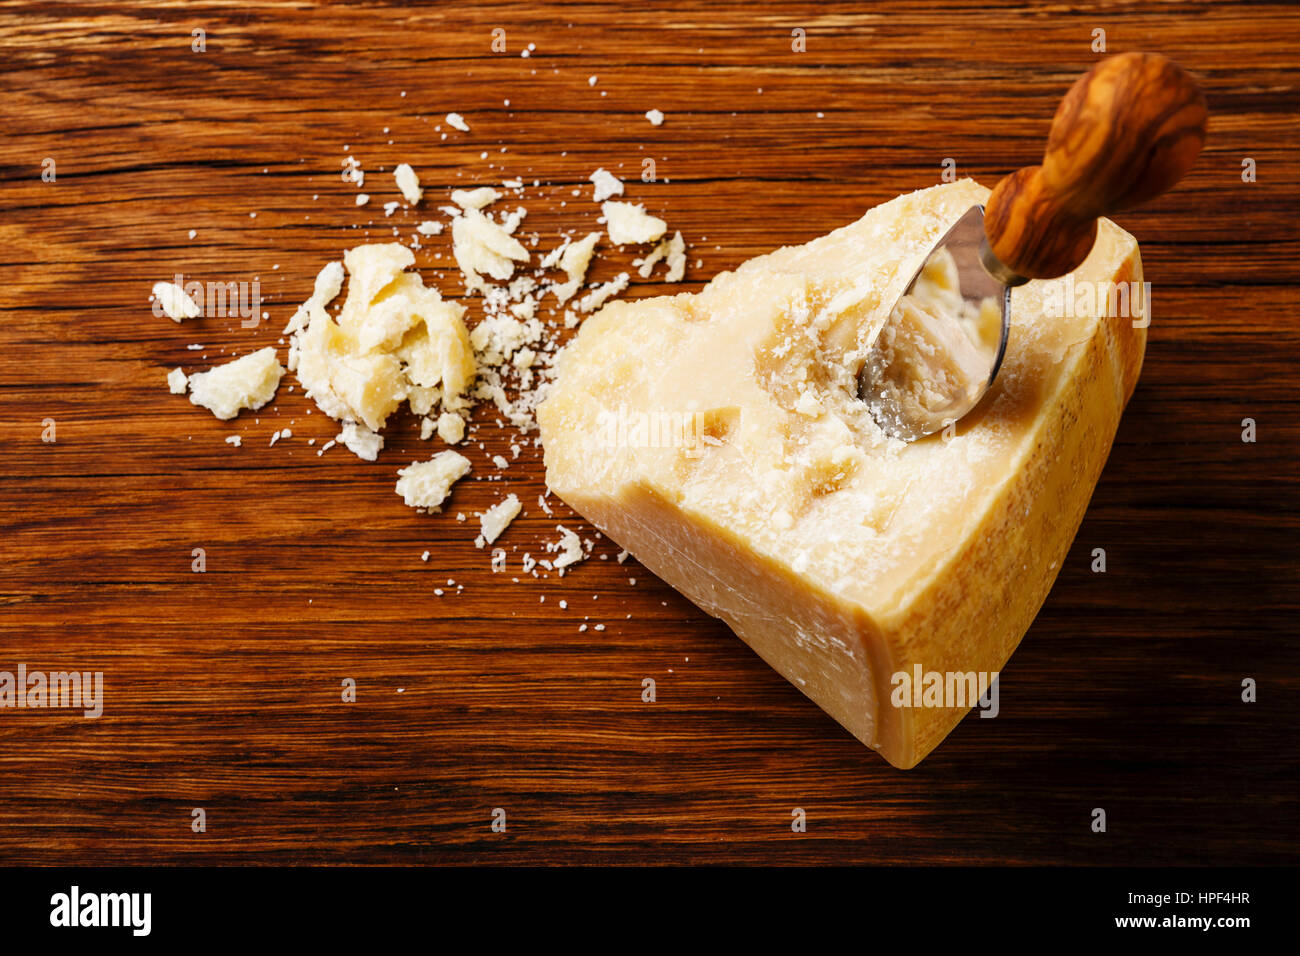 Parmesan cheese on wooden board with cheese knife close-up Stock Photo